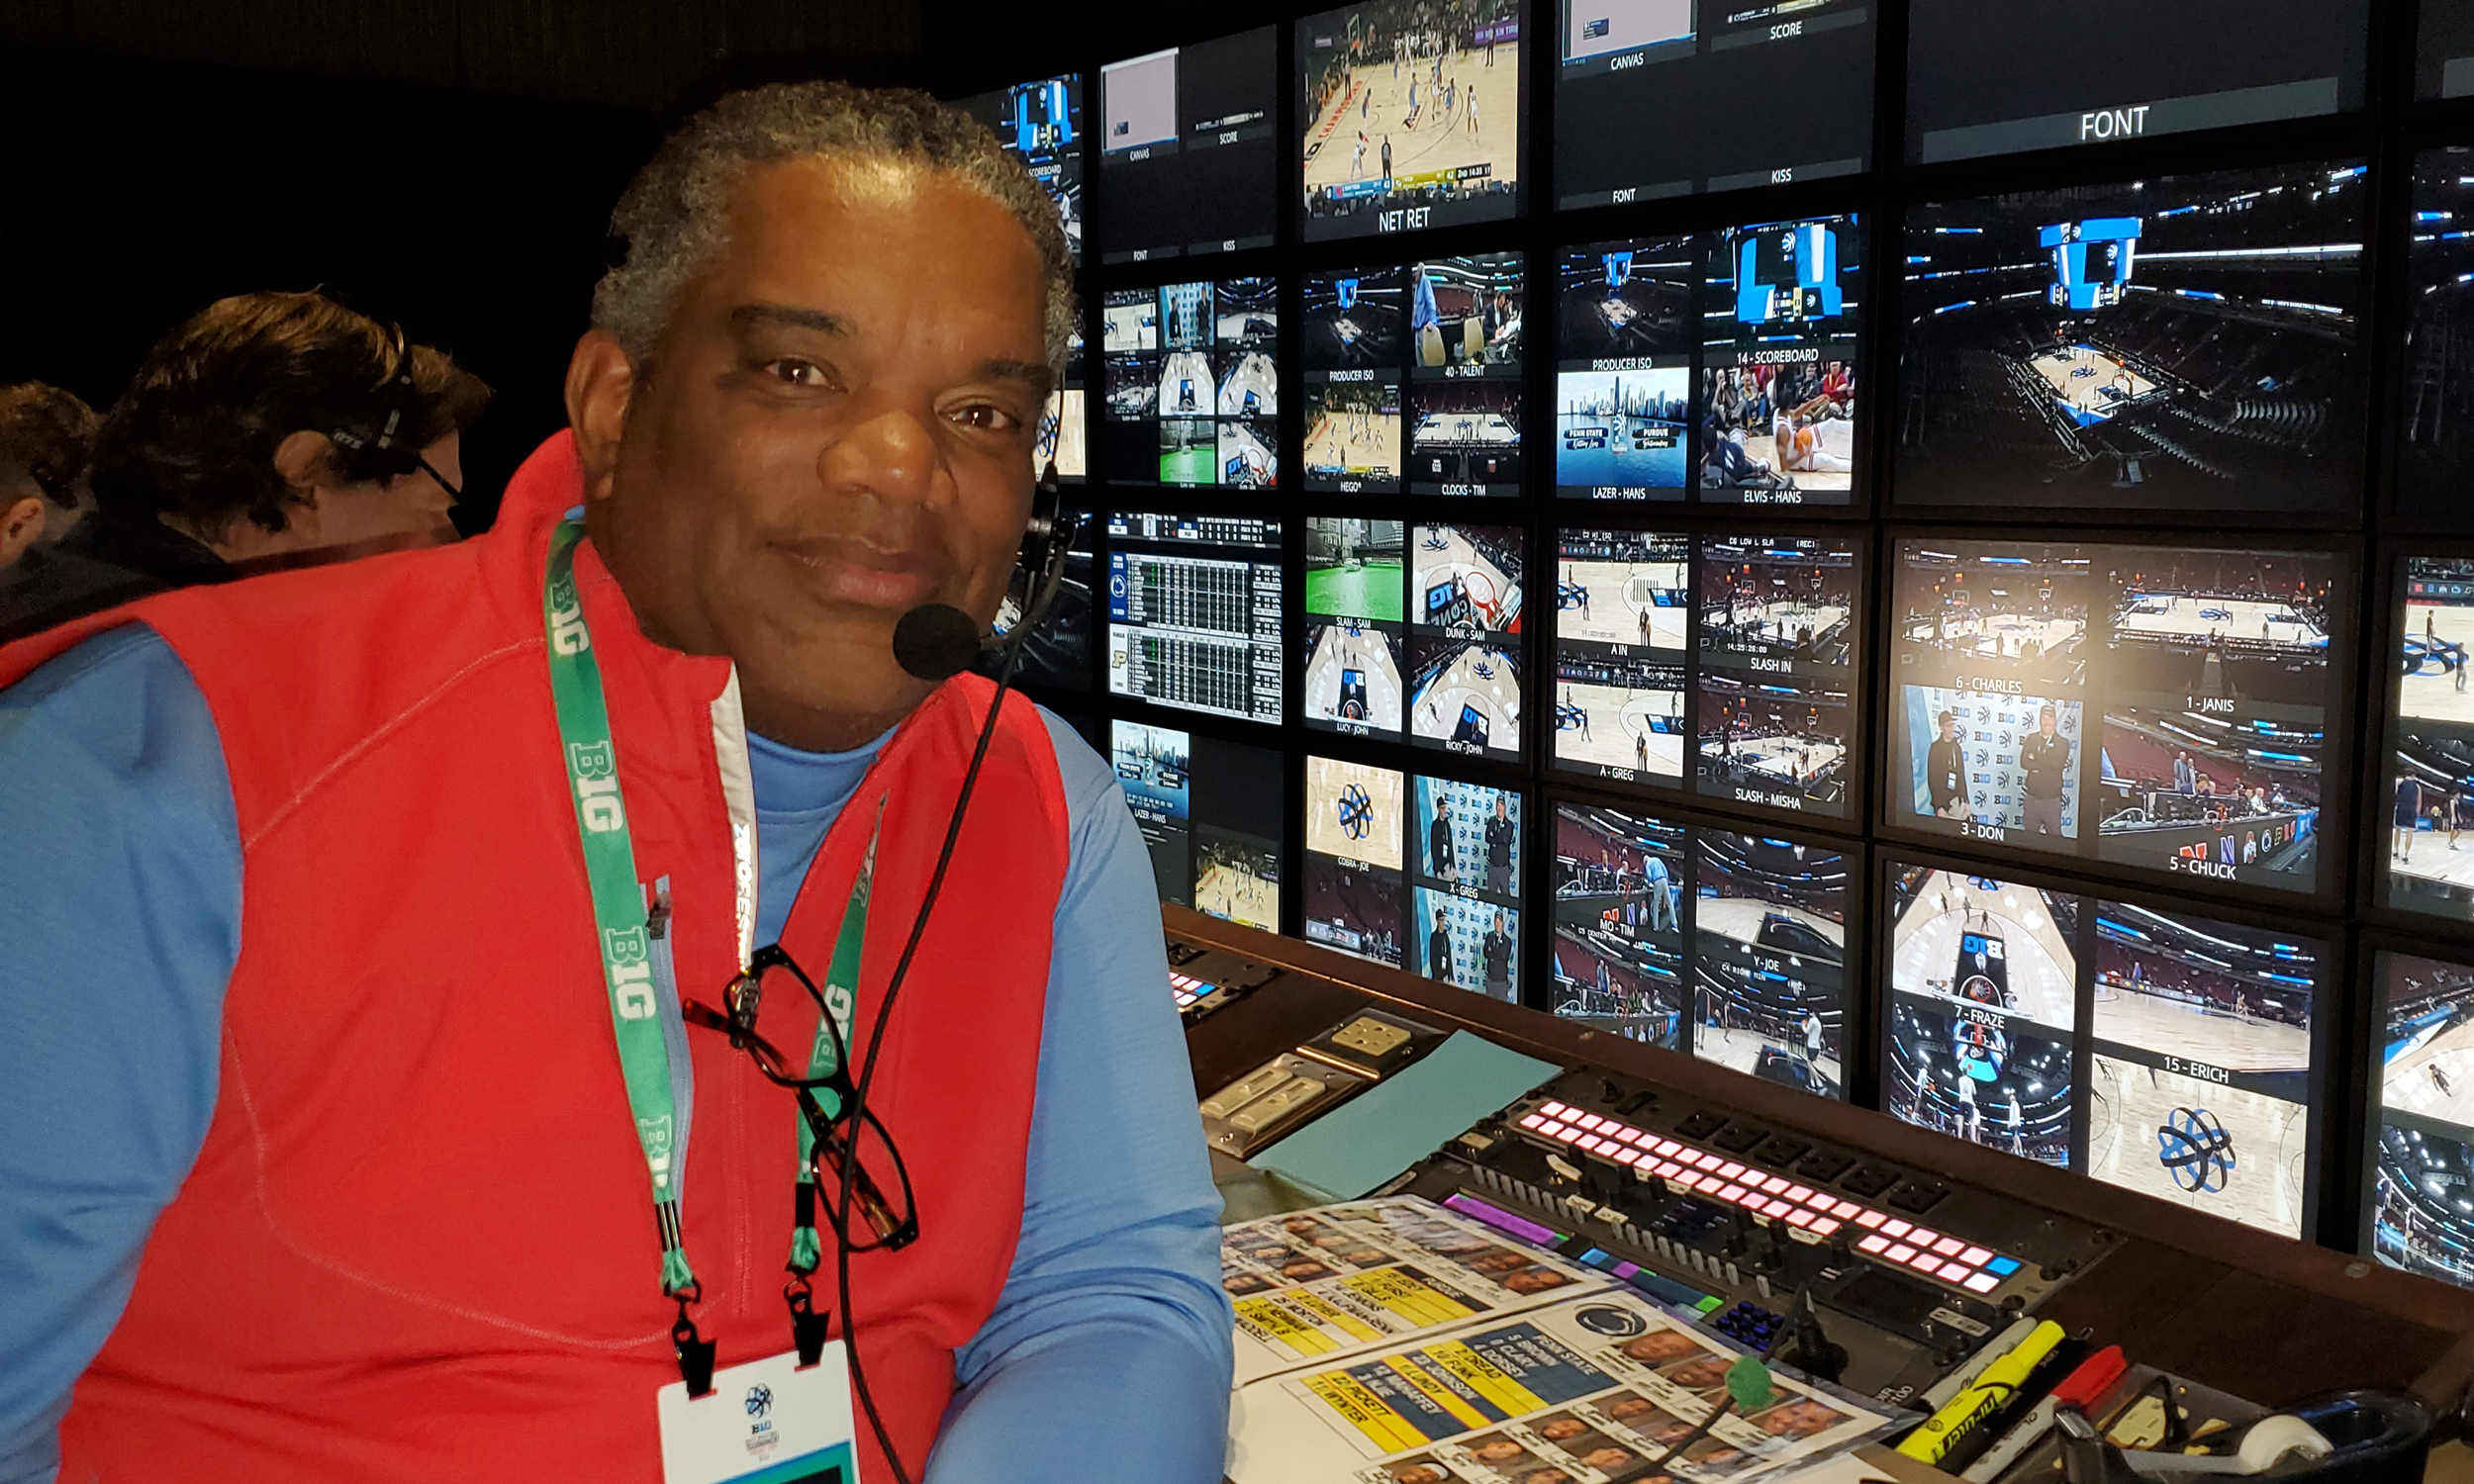 Live From Mens Final Four CBS Sports Director Mark Grant Gets His Shot In the Chair After 40+ Years In The Industry